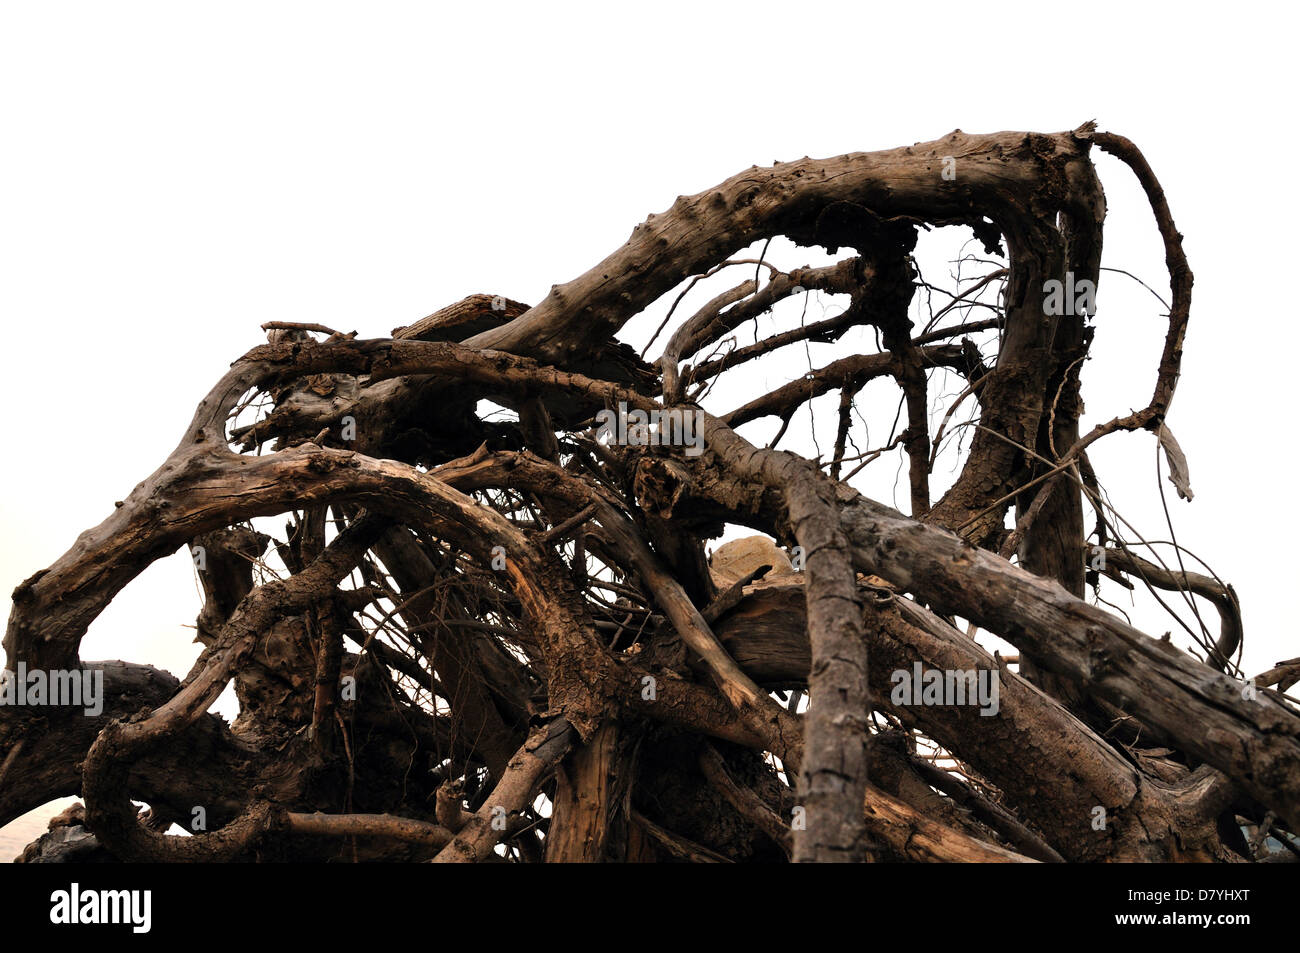 Tangled driftwood washed ashore. Distorted tree branches abstract background. Stock Photo